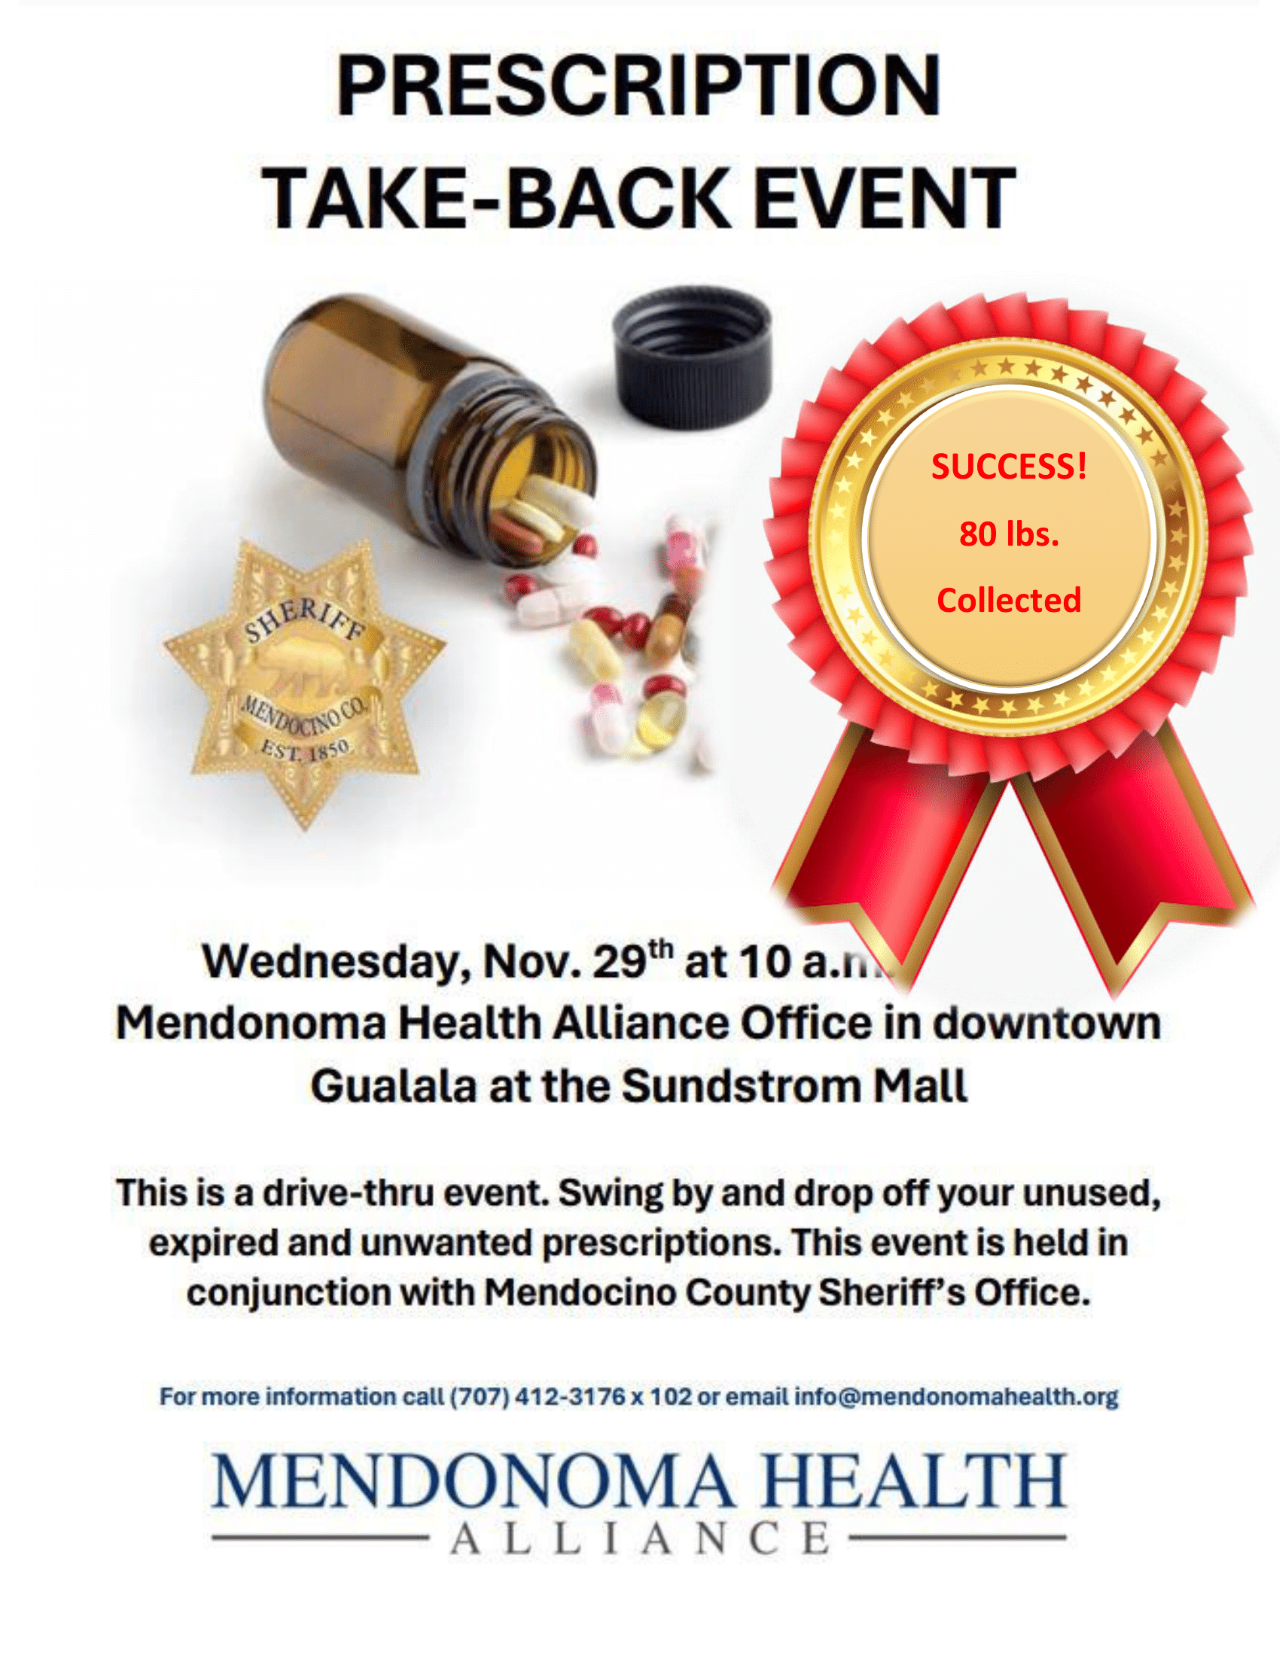 Prescription Take-Back event flyer, showing a spilled prescription bottle of pills, all colors, next to a Mendocino County Sheriff's badge for Mendonoma Health Alliance November 29 event at Sundstrom Mall in Gualala. Large red award ribbon. Inside the center it reads SUCCESS! 80 lbs Collected.